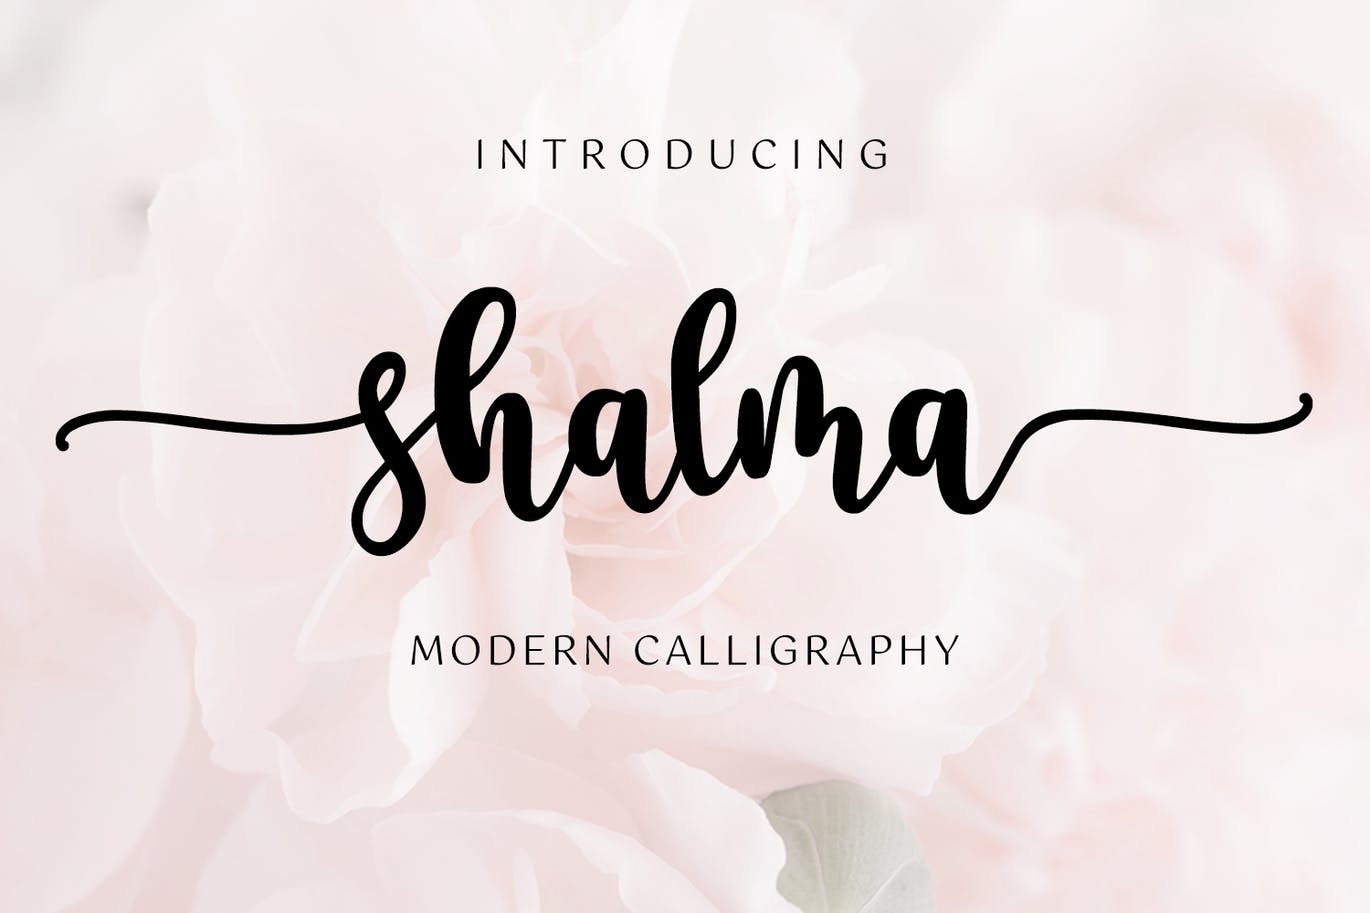 A free modern calligraphy font